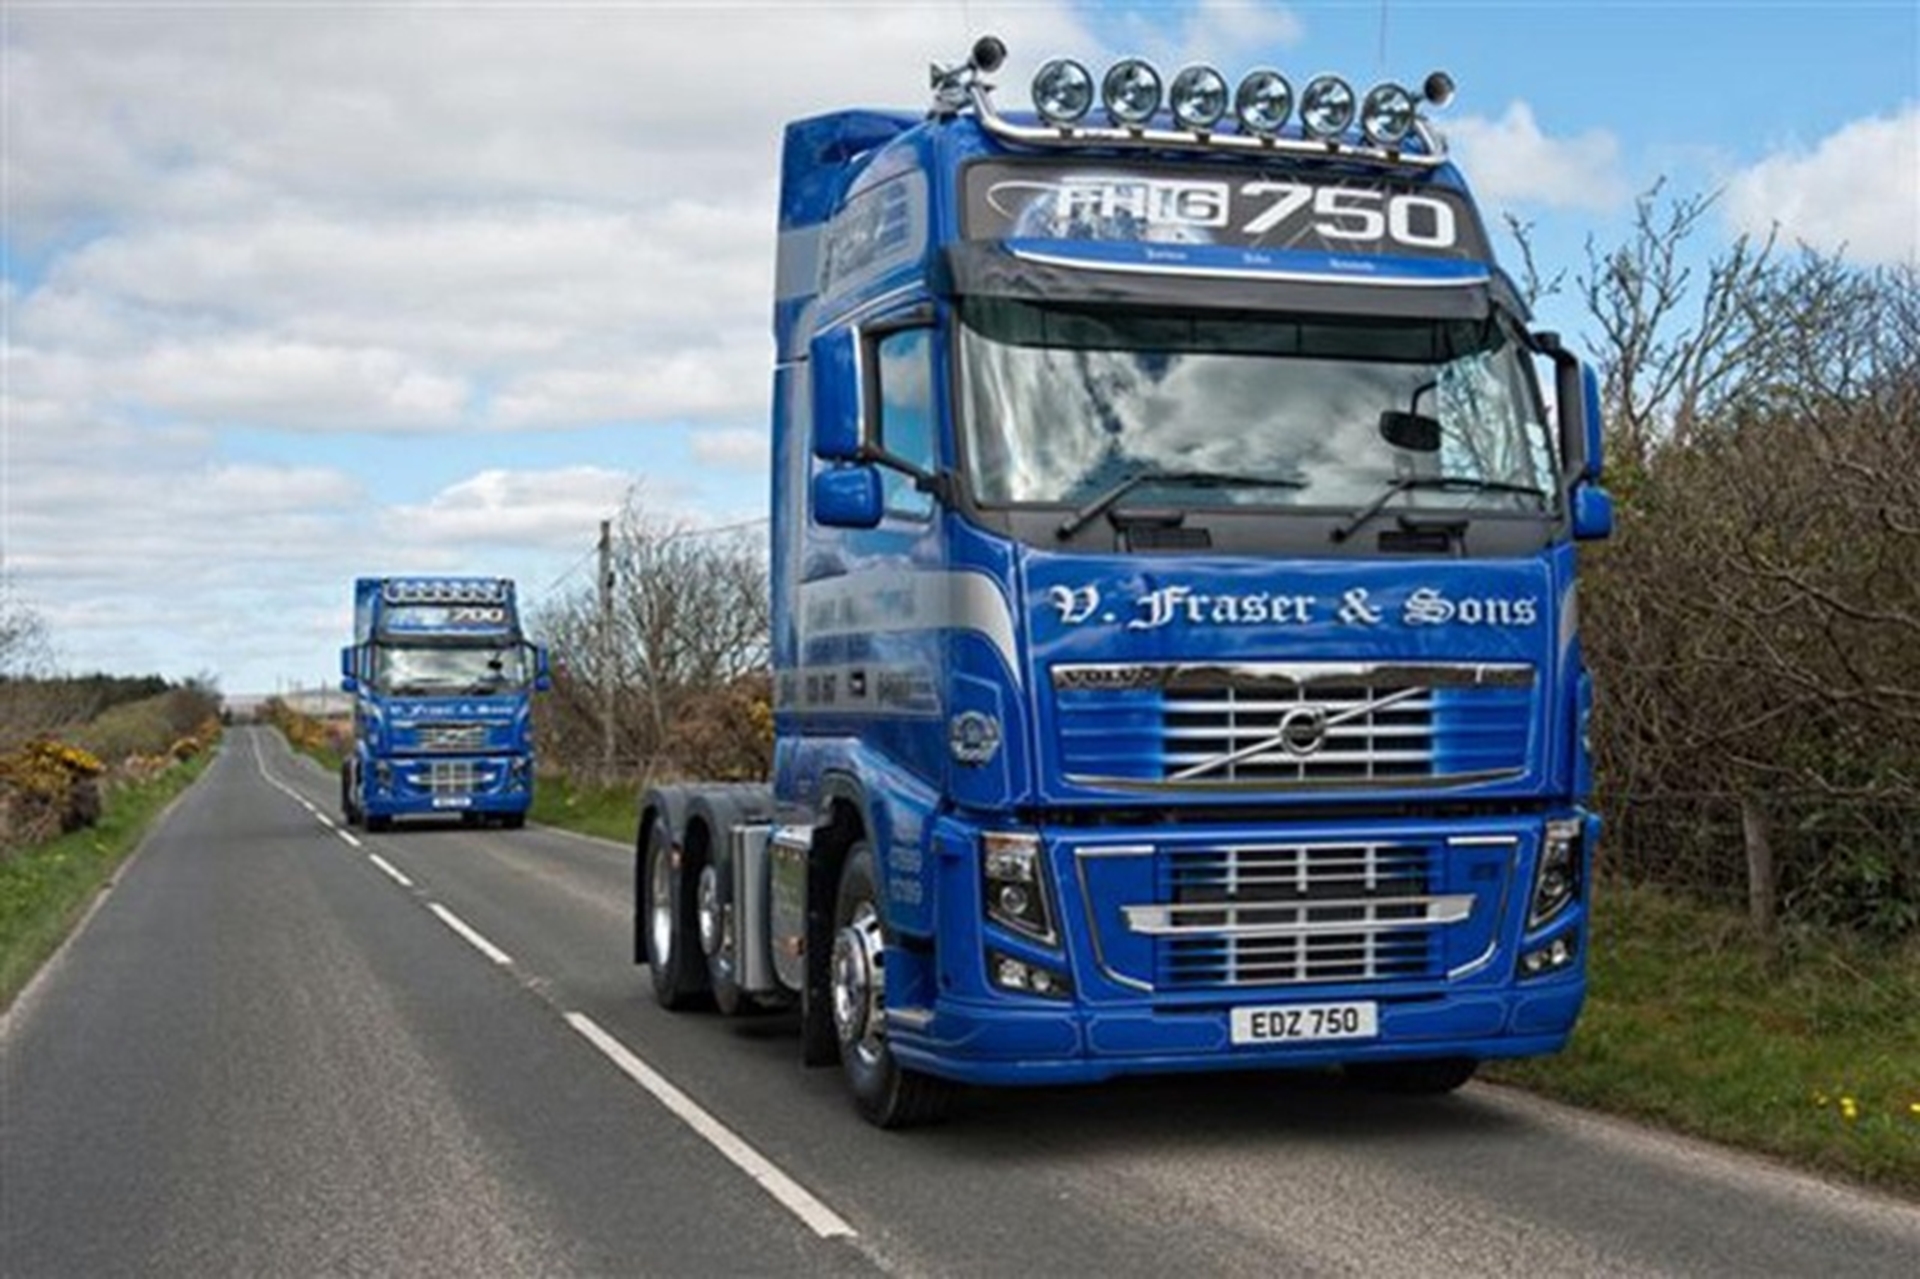 FIRST VOLVO FH16-750 IN NORTHERN IRELAND FOR V FRASER & SONS THIRTIETH ANNIVERSARY